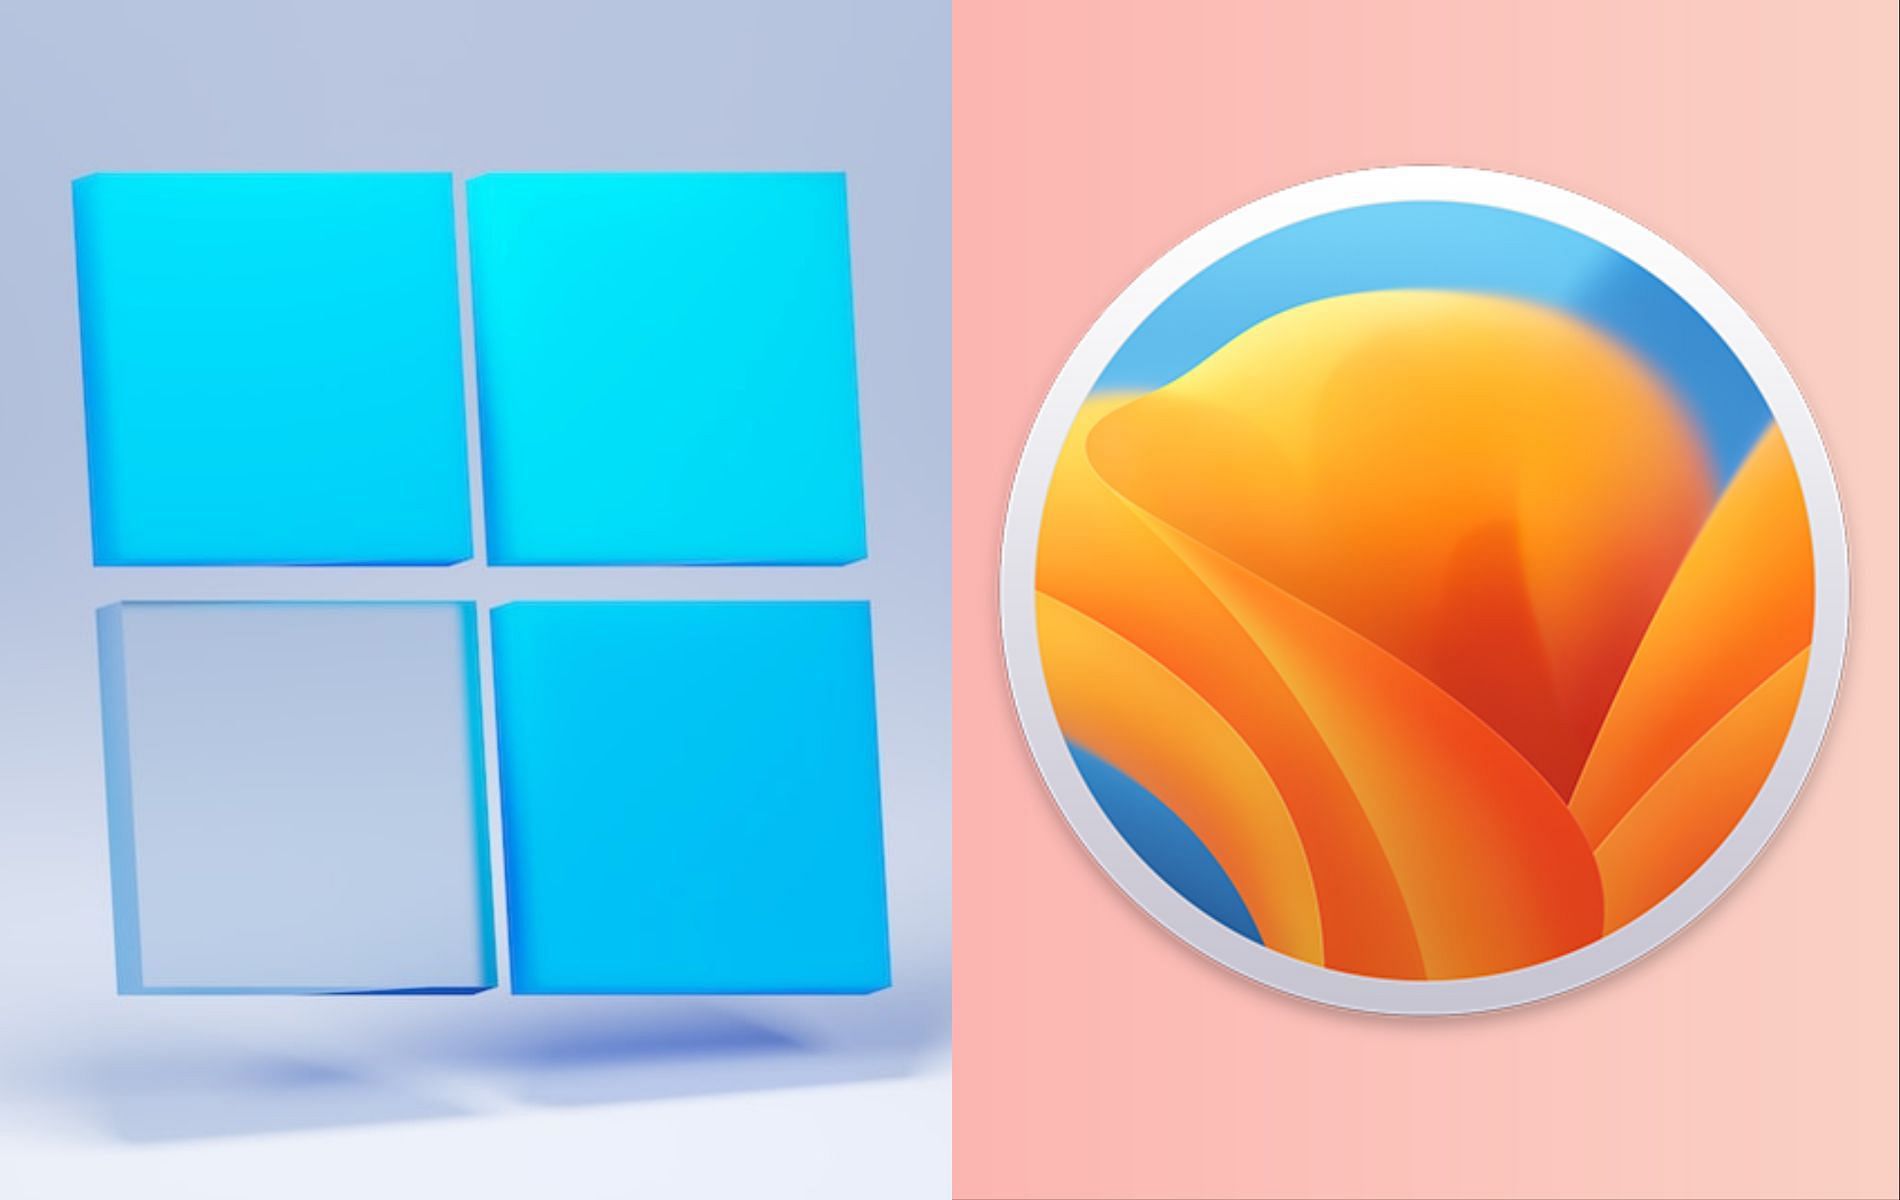 Microsoft Windows vs Apple macOS: Which OS to choose for gaming in 2023?